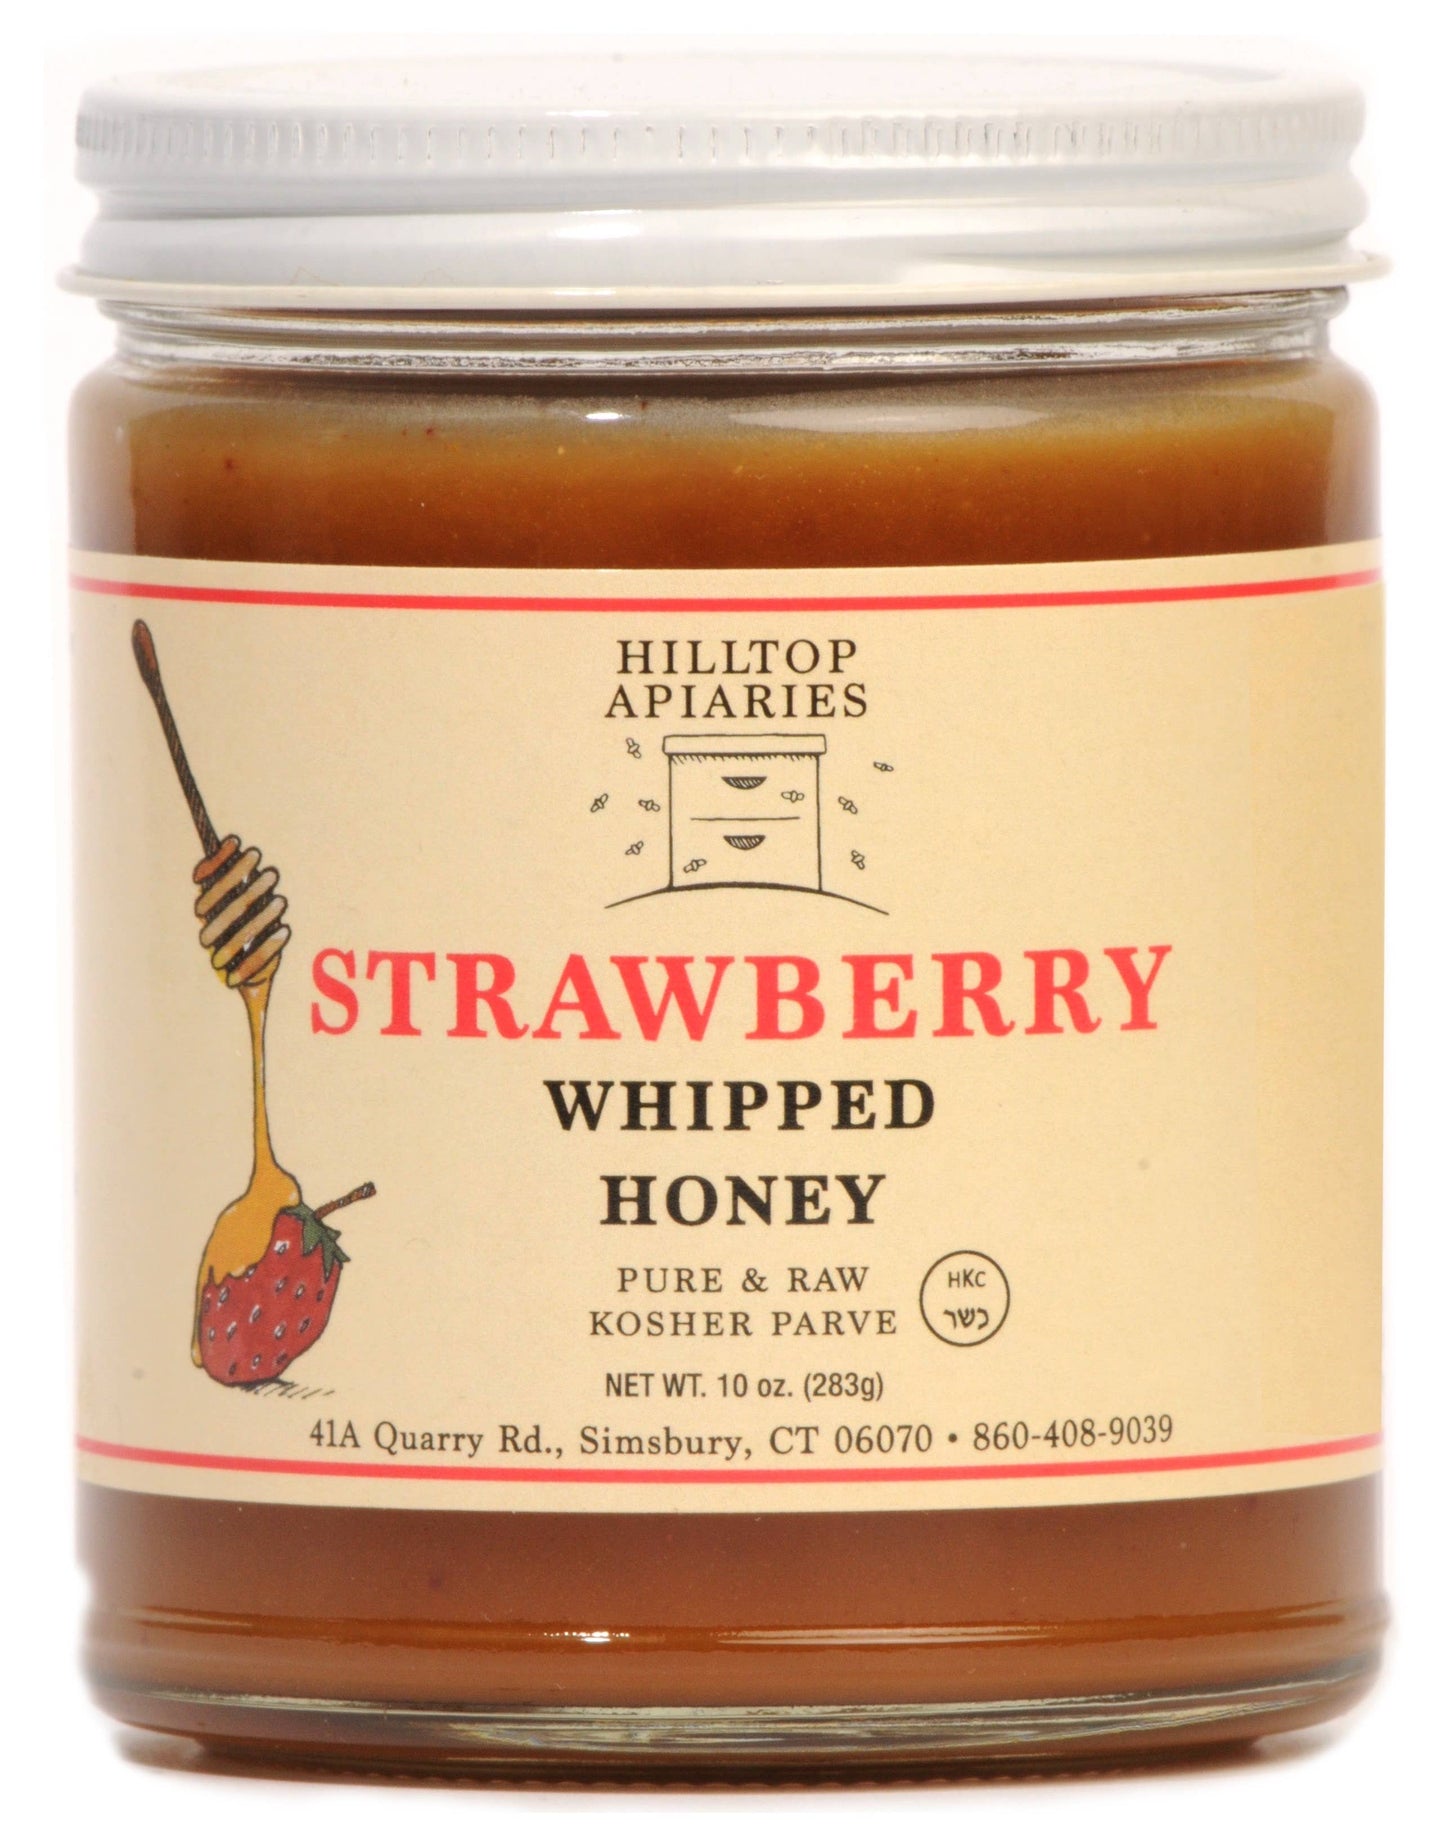 Strawberry Whipped Honey Spread